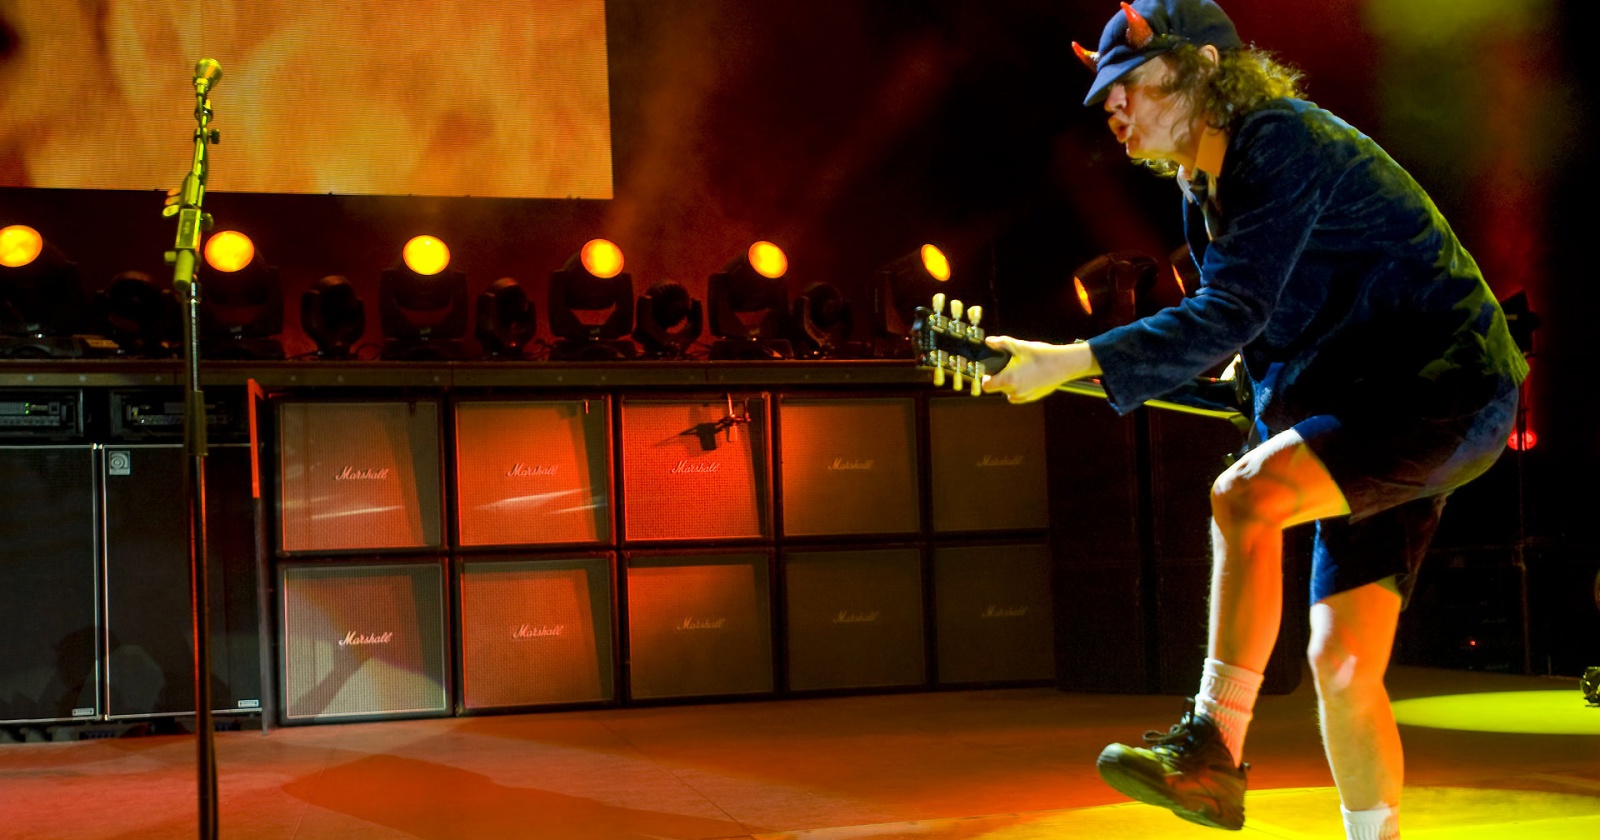 Duck walk performed by Angus Young